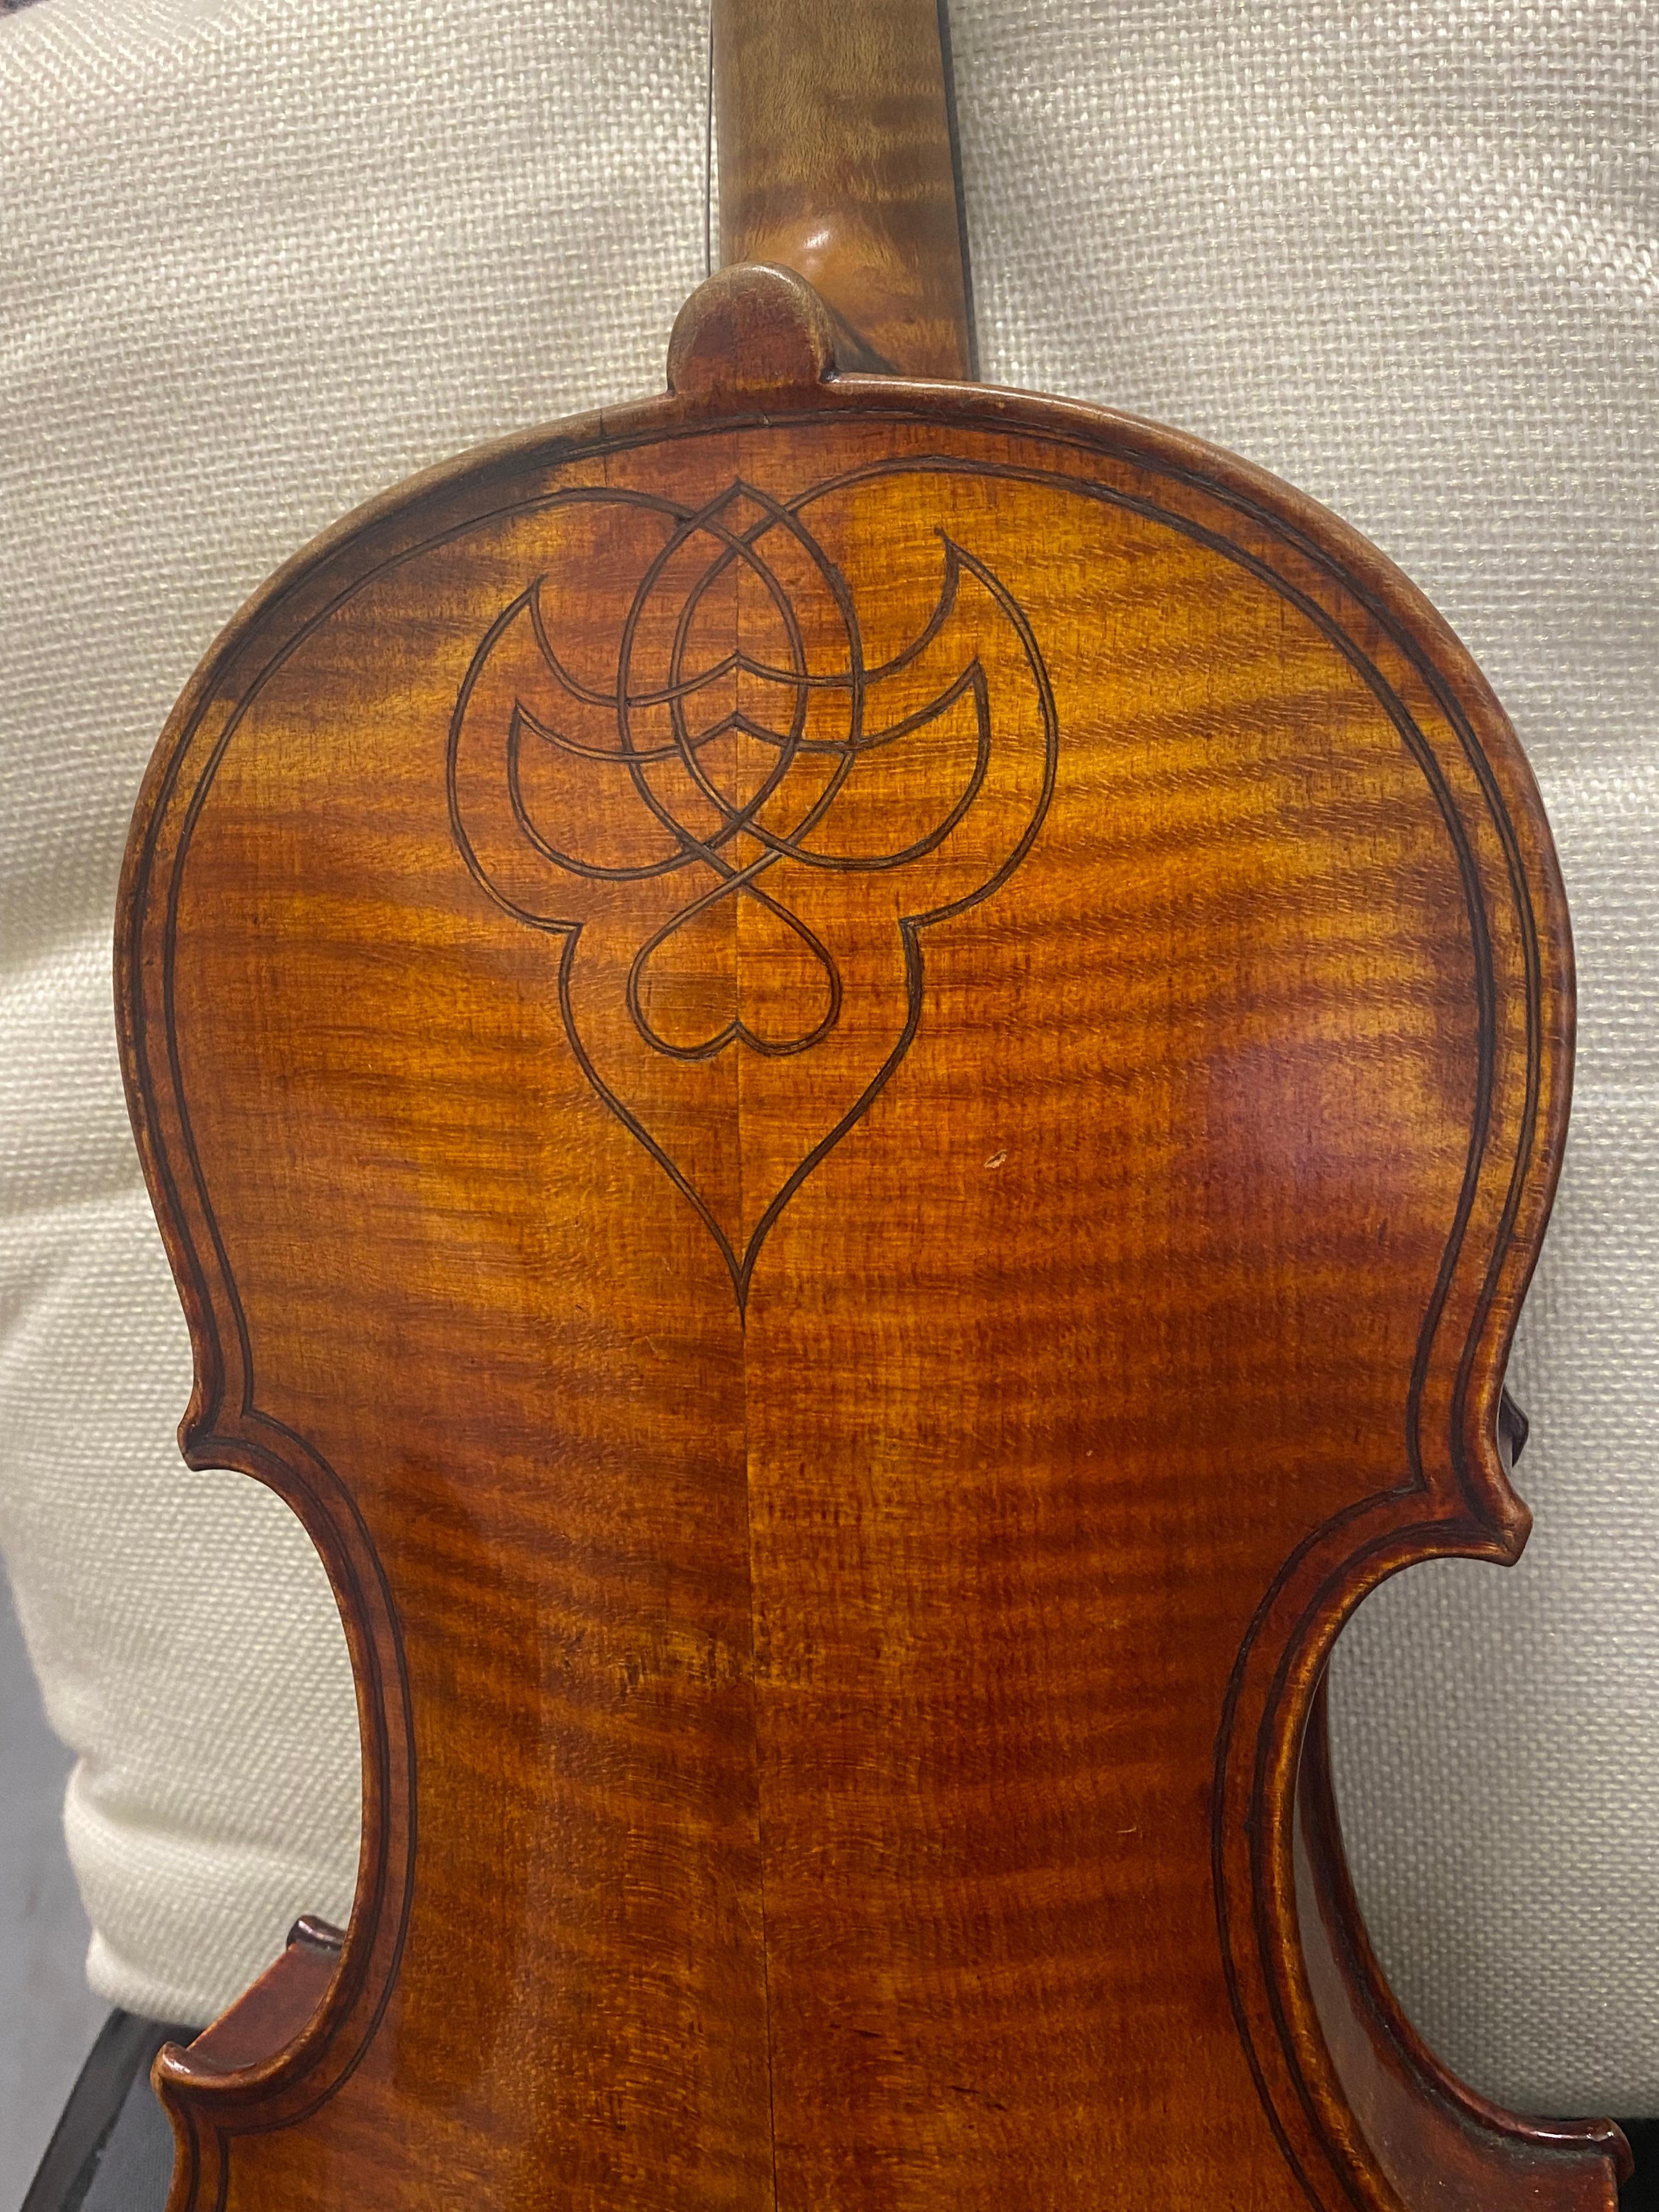 Antique German c1850 Violin in style of Giovanni Maggini, repaired by J Devereux For Sale 2